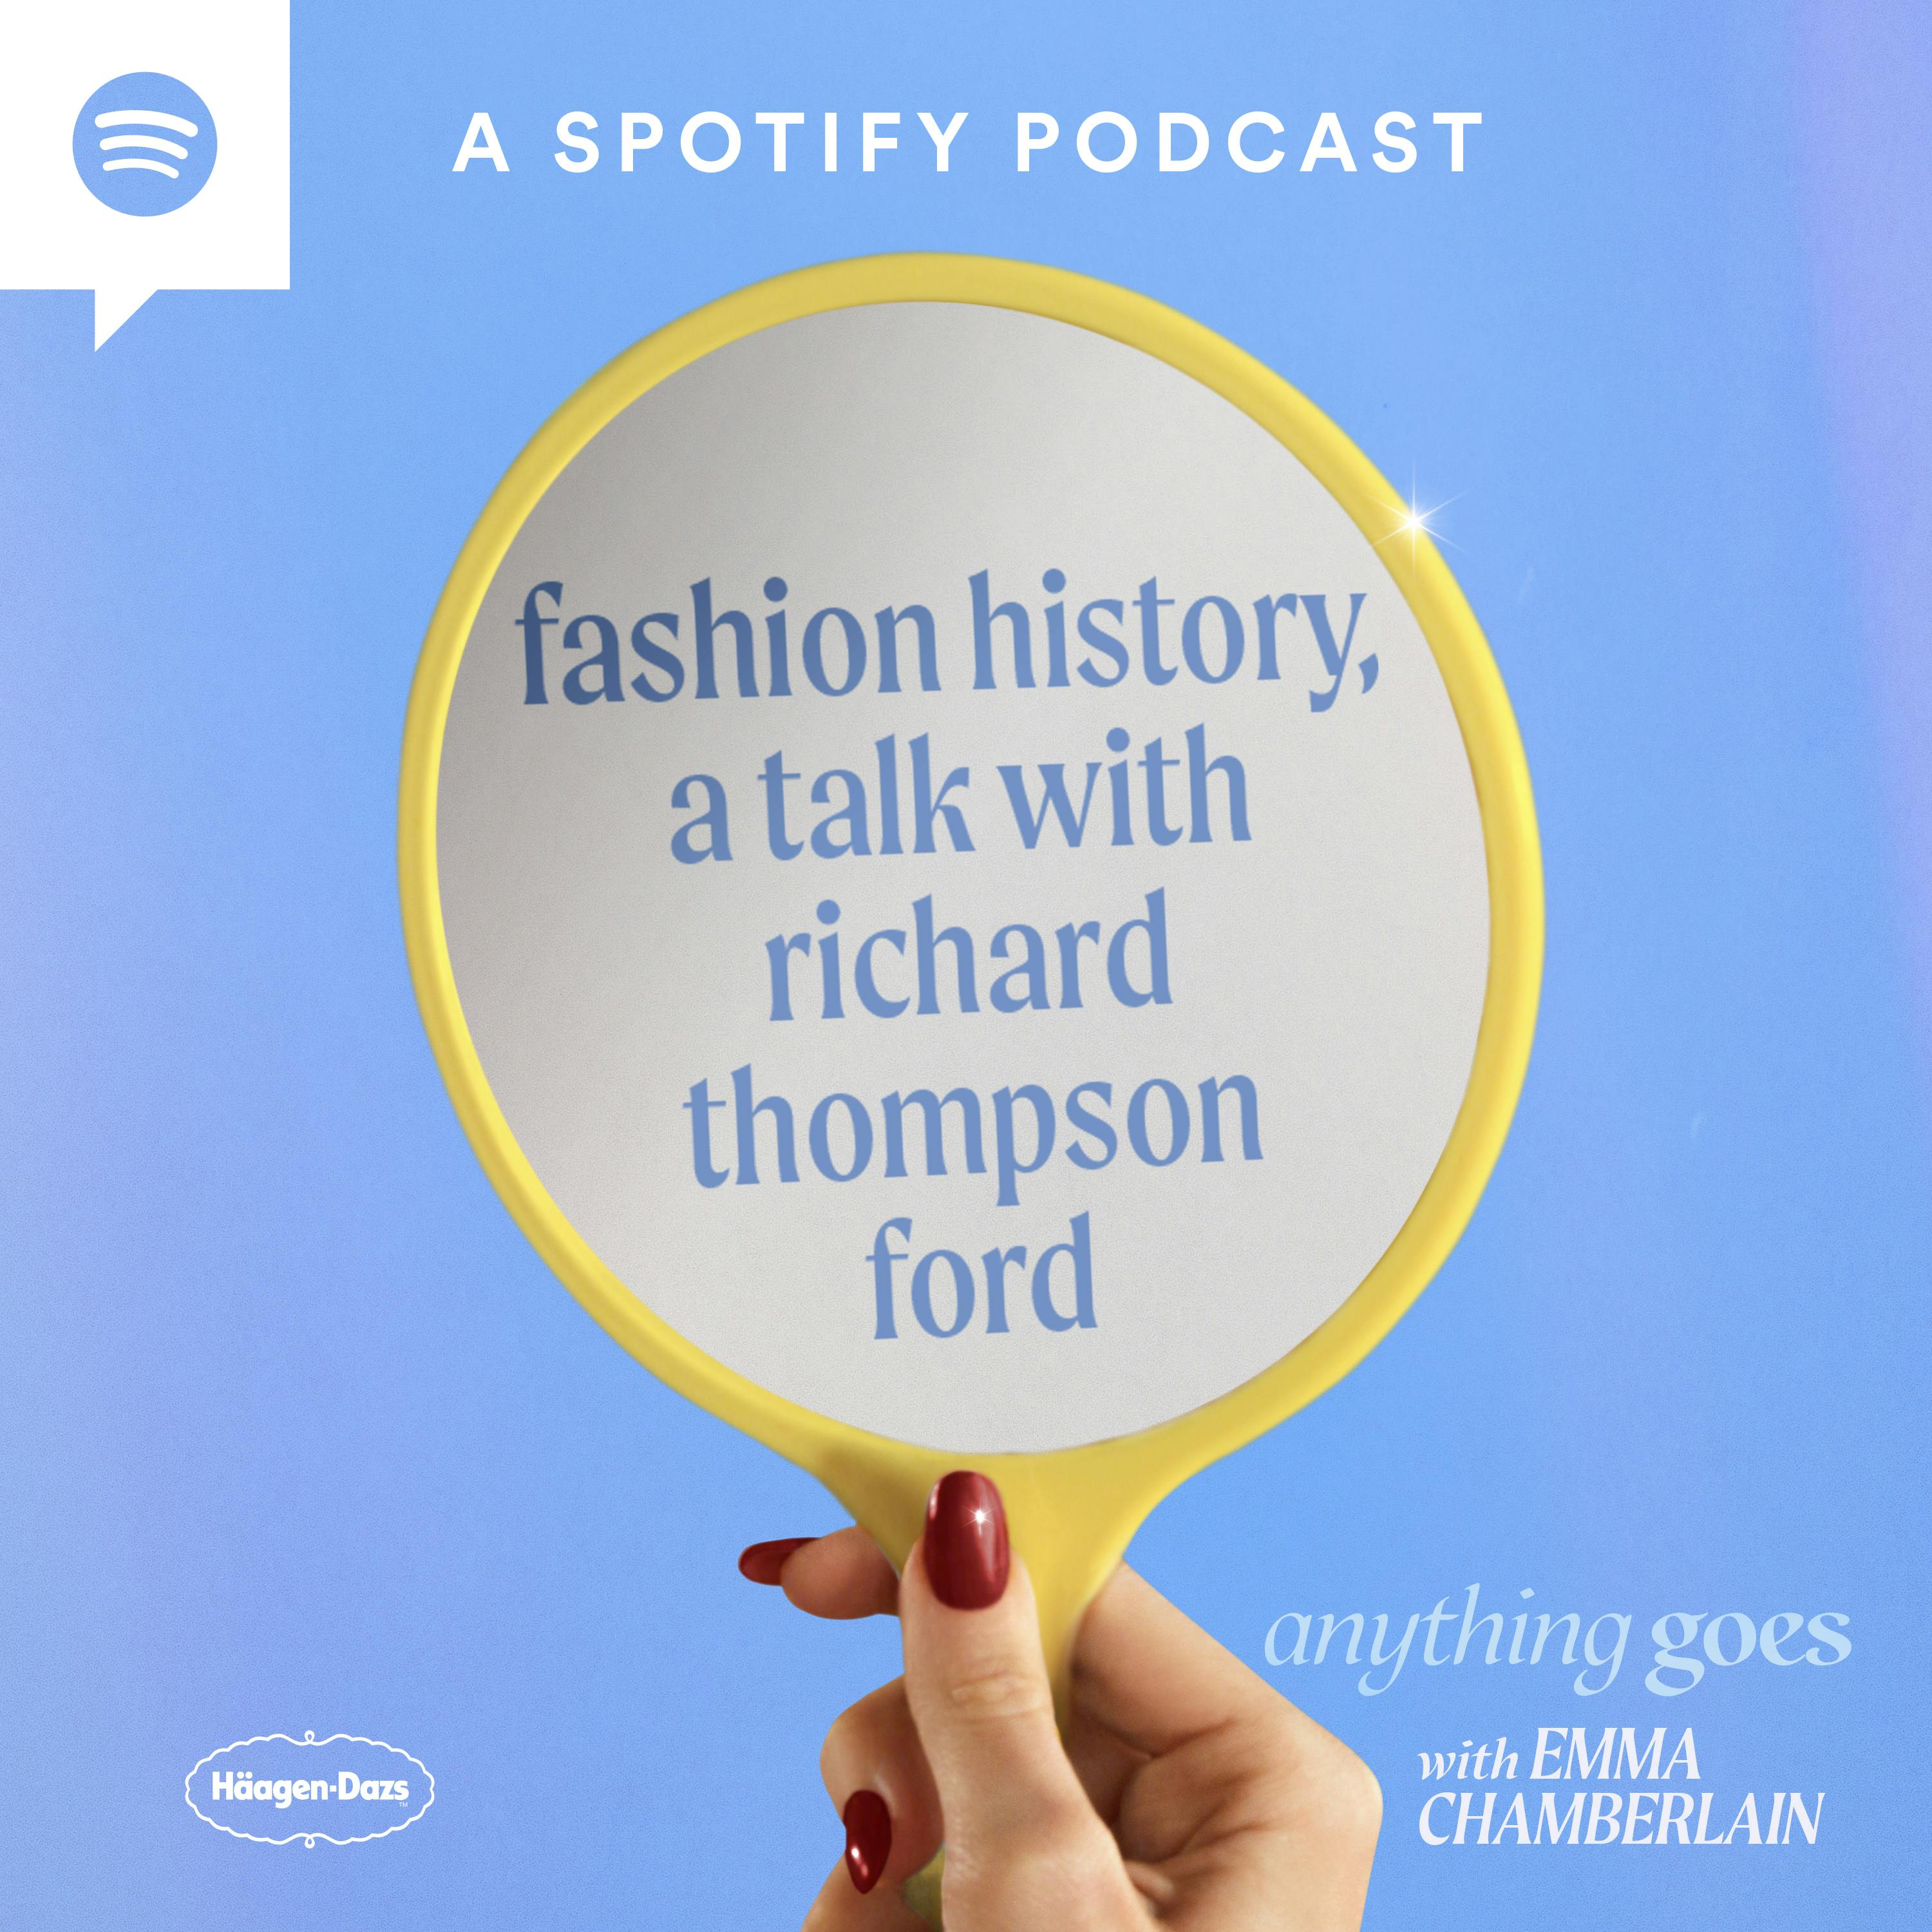 fashion history, a talk with richard thompson ford [video]